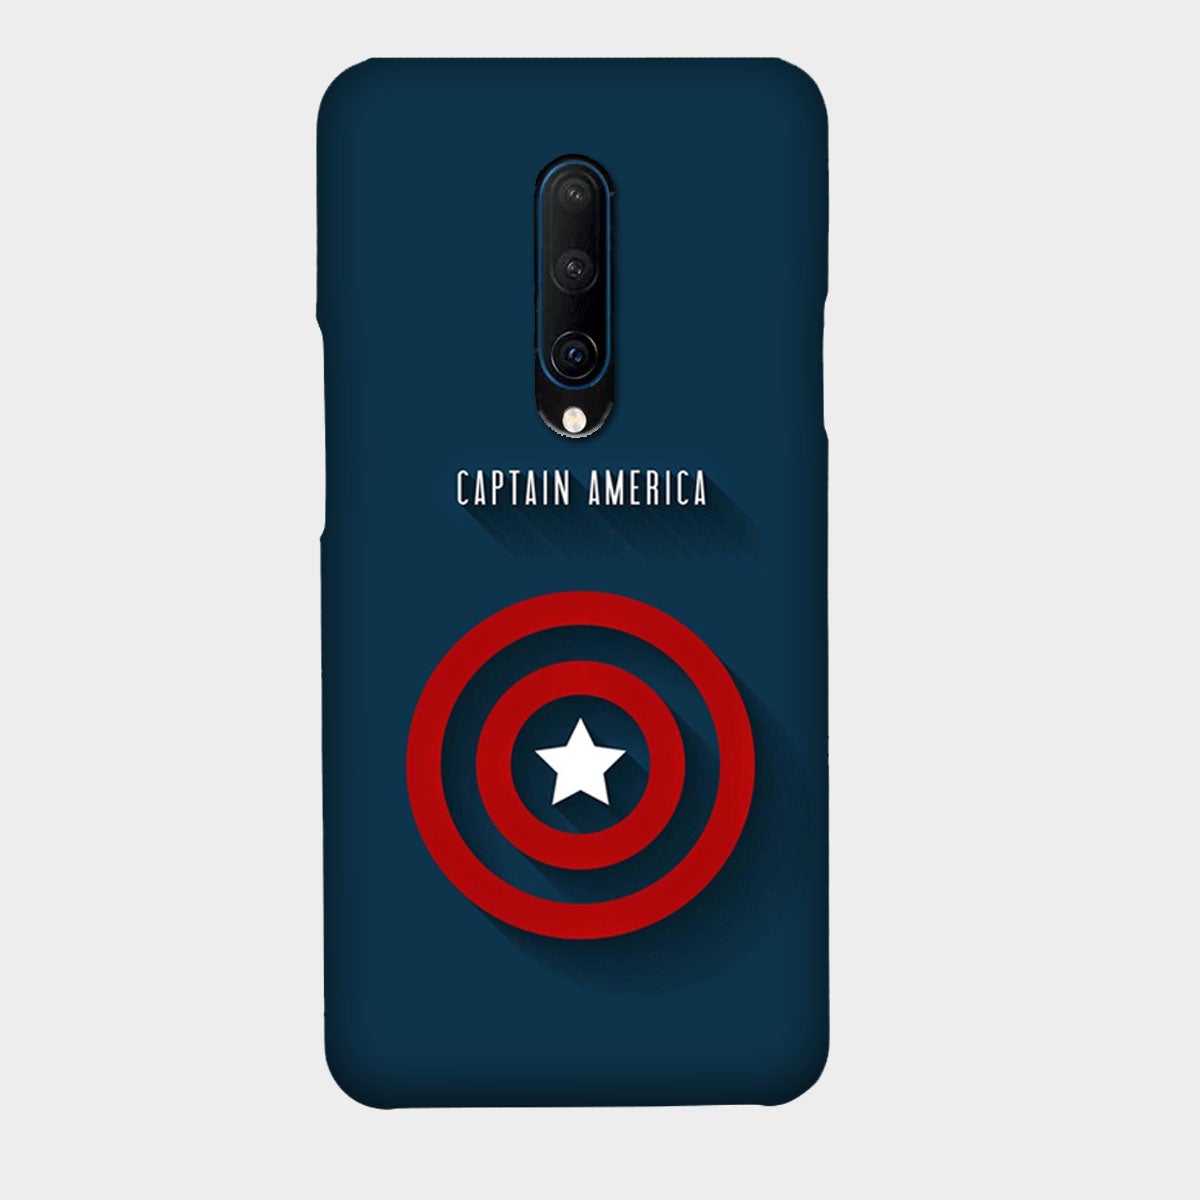 Captain America - Blue - Mobile Phone Cover - Hard Case - OnePlus